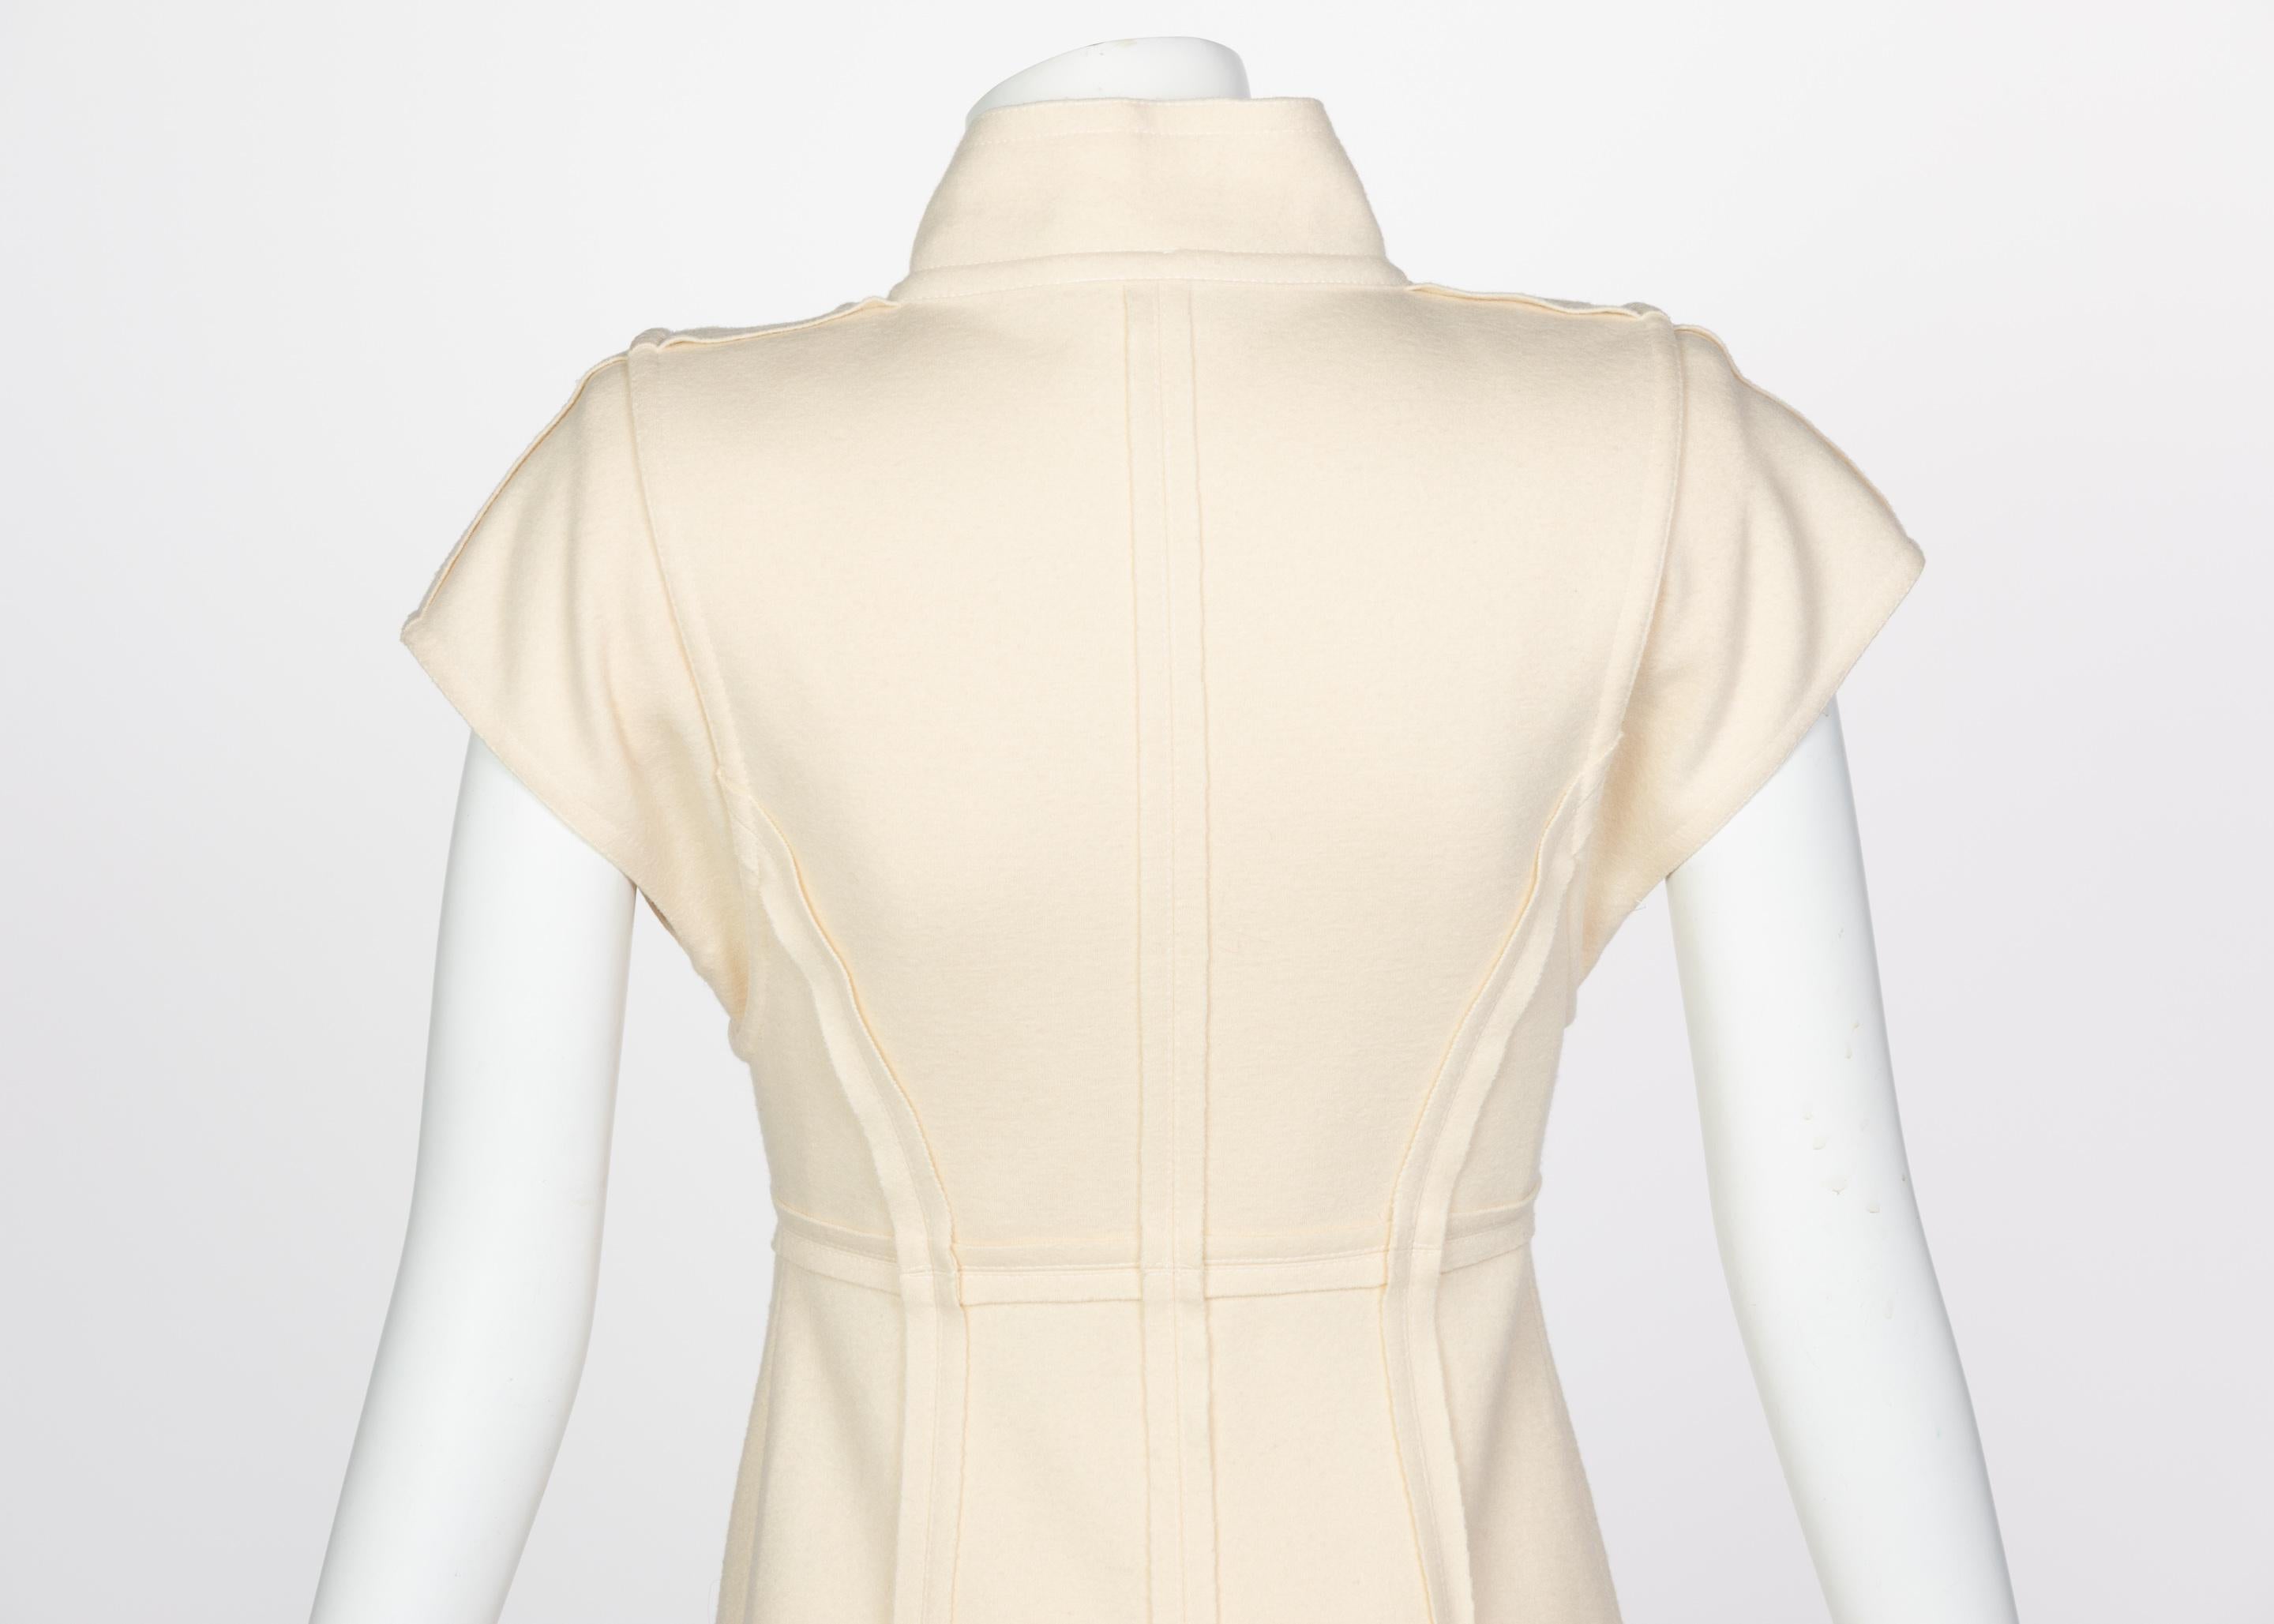 Fendi Ivory Sculpted Wool Short Sleeve Dress, 2008 In Excellent Condition For Sale In Boca Raton, FL